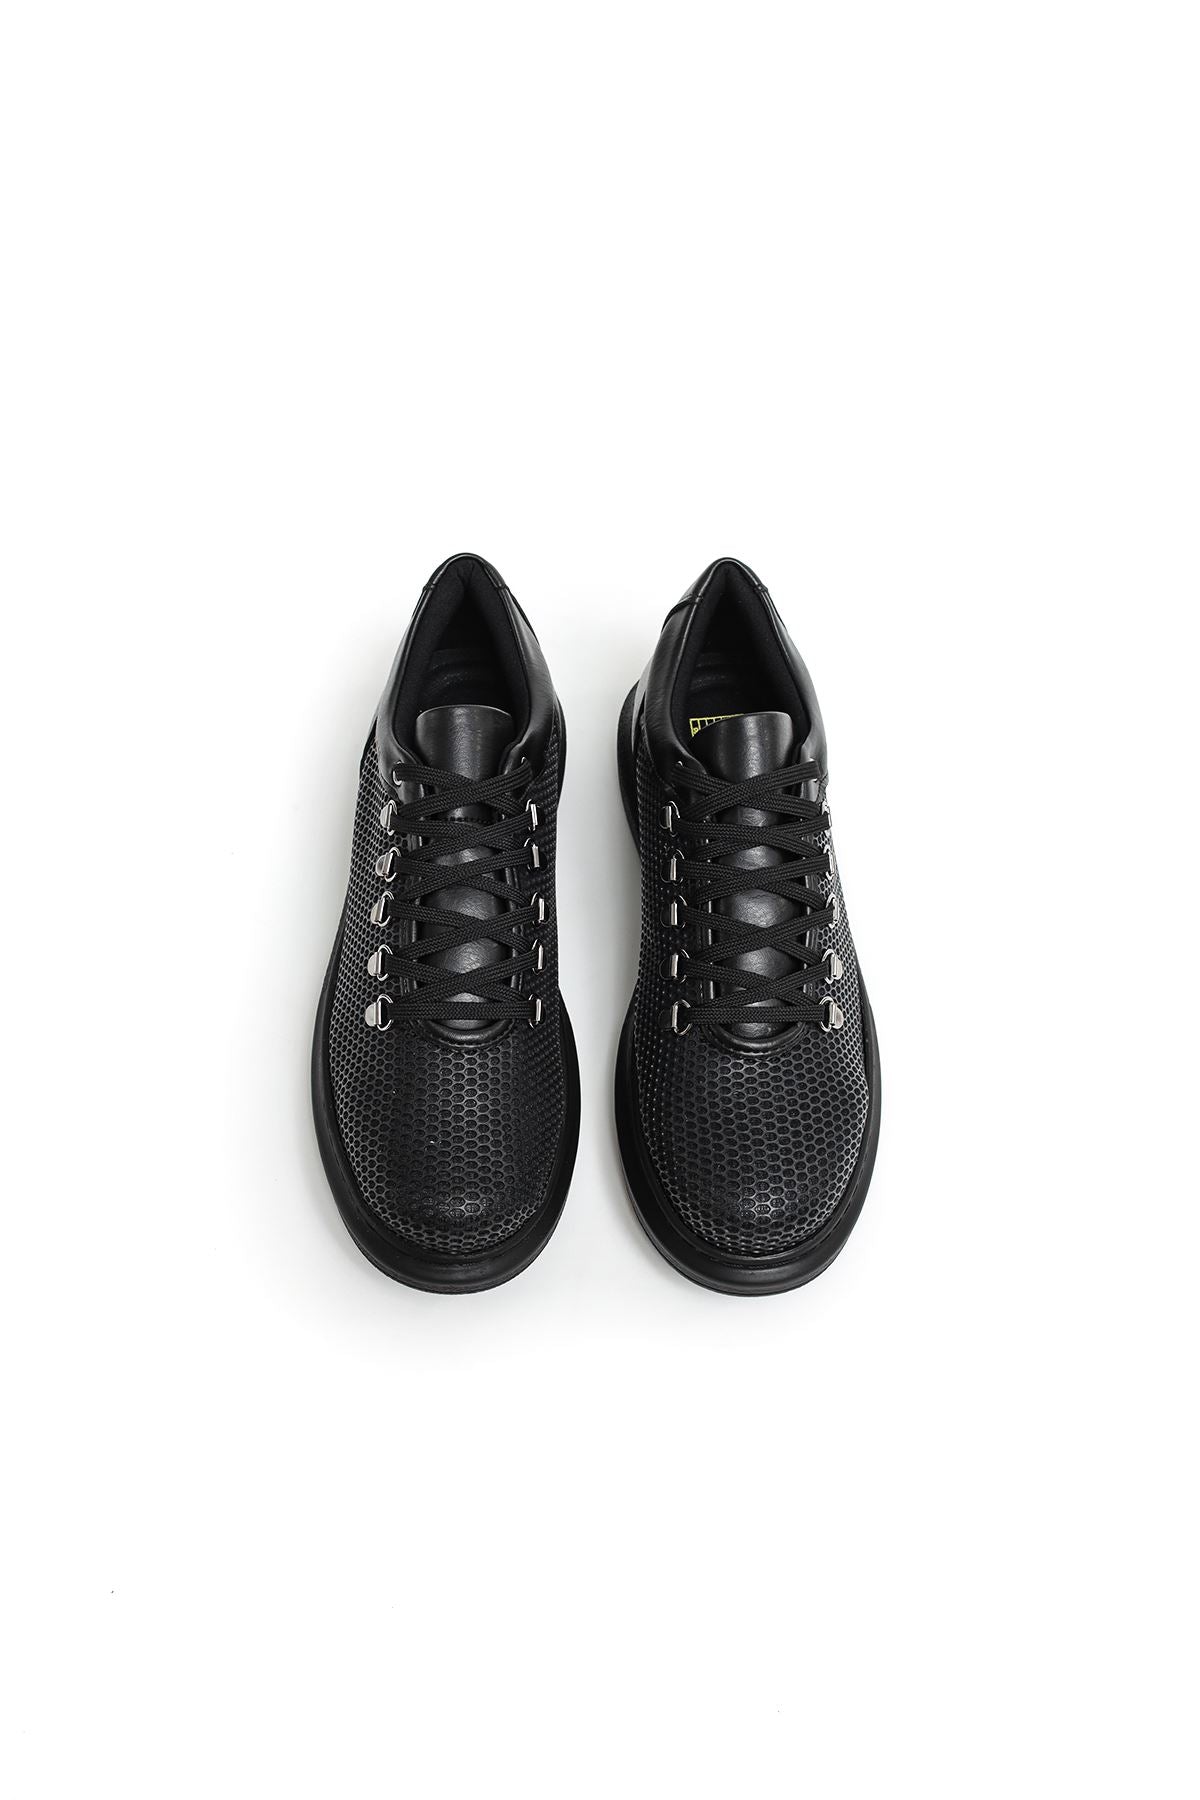 CH021 Men's Unisex Full black Honeycomb Processing Casual Sneaker Sports Shoes - STREETMODE ™